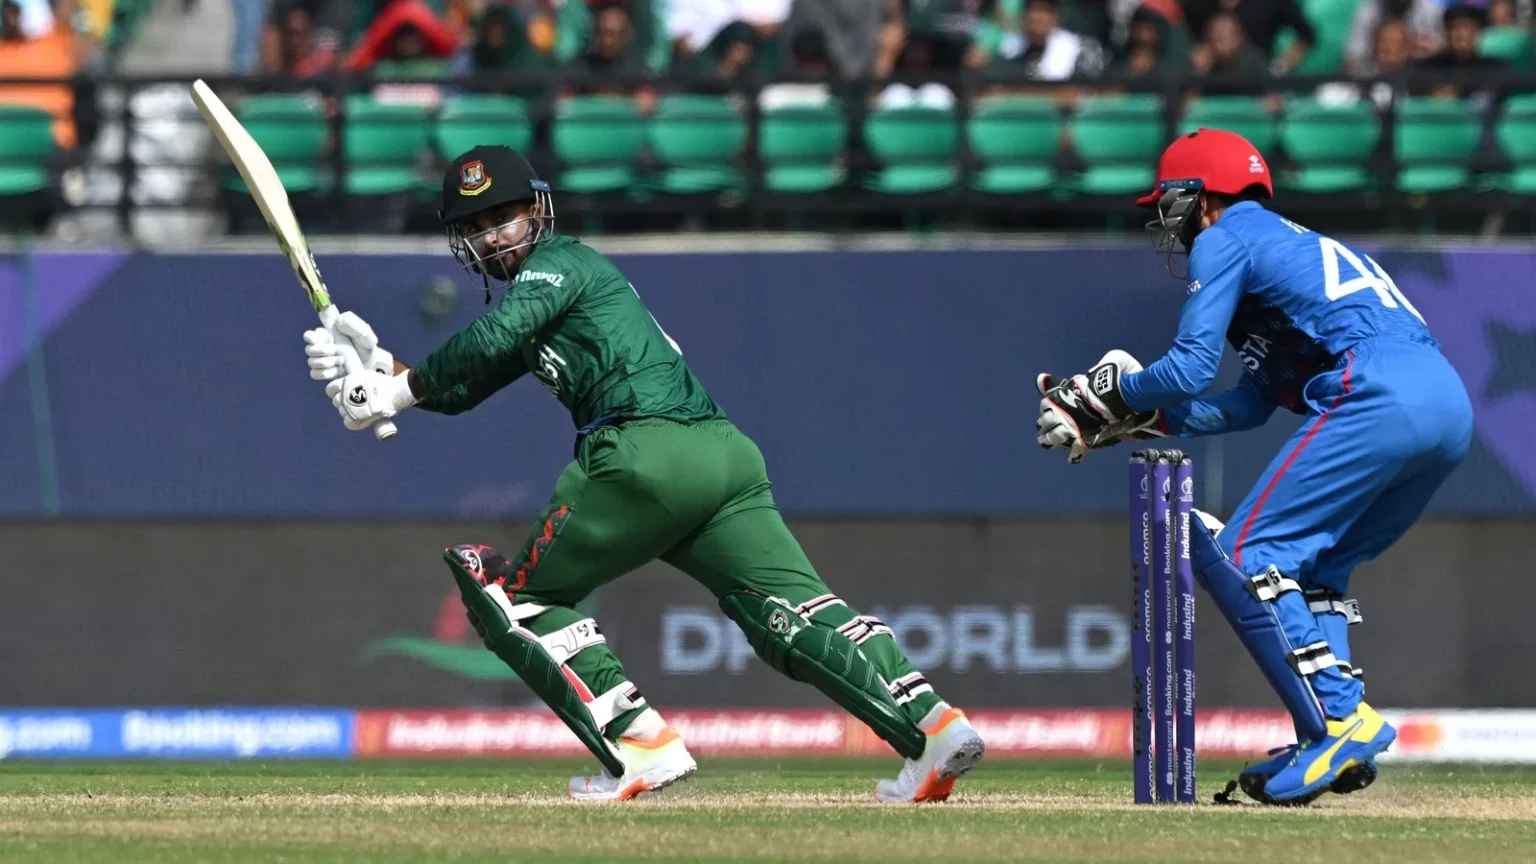 bangladesh-bag-a-six-wicket-win-over-afghanistan-in-their-first-match-of-the-world-cup